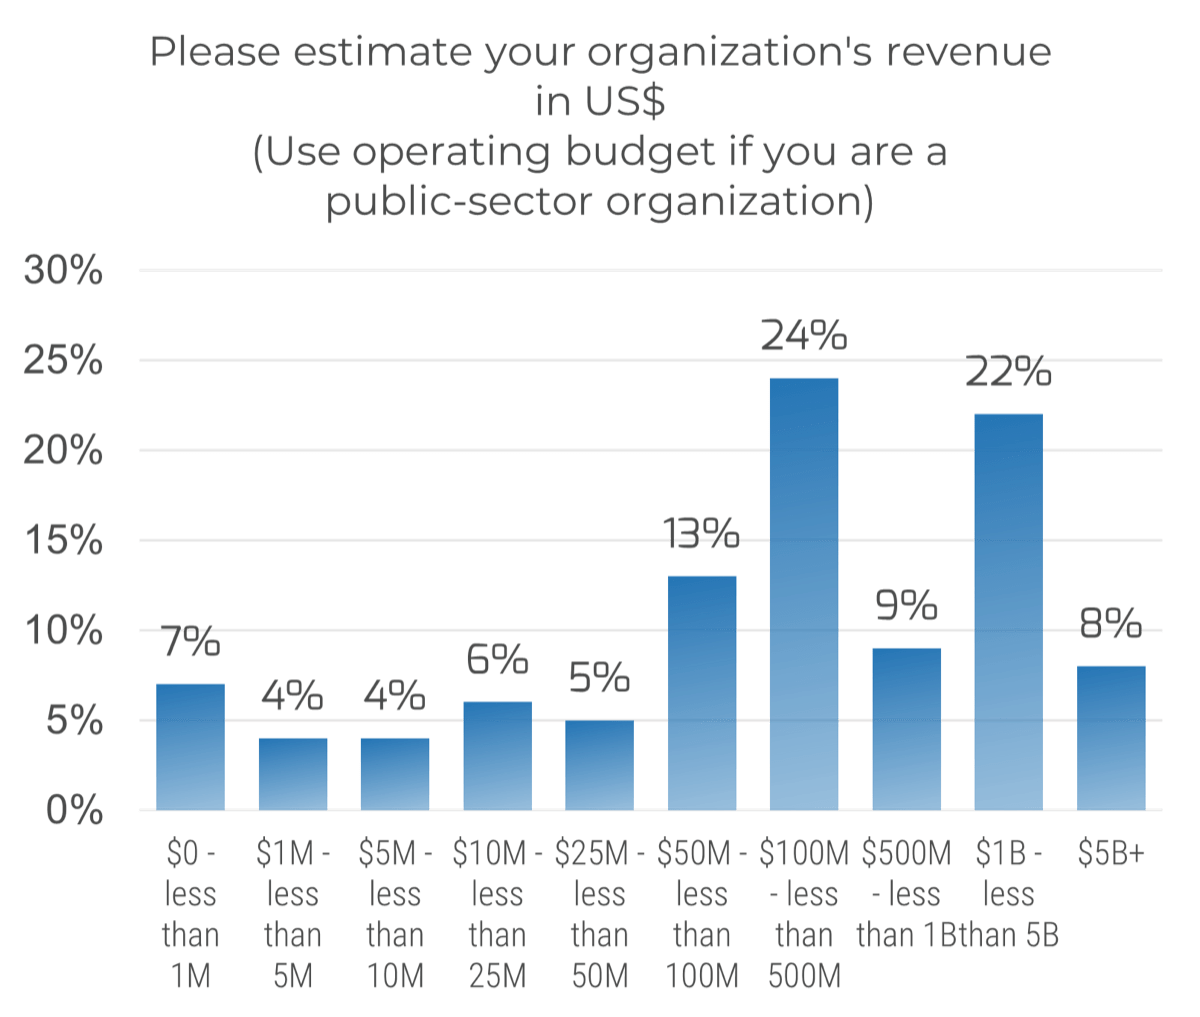 A bar chart titled 'Please estimate your organization's revenue in US$ (Use operating budget if you are a public-sector organization)' measuring survey responses. '$0 - less than 1M, 7%', '$1M - less than 5M, 4%', '$5M - less than 10M, 4%', '$10M - less than 25M, 6%', '$25M - less than 50M, 5%', '$50M - less than 100M, 13%', '$100M - less than 500M, 24%', '$500M - less than 1B, 9%', '1B - less than 5B, 22%', '$5B+, 8%'. 